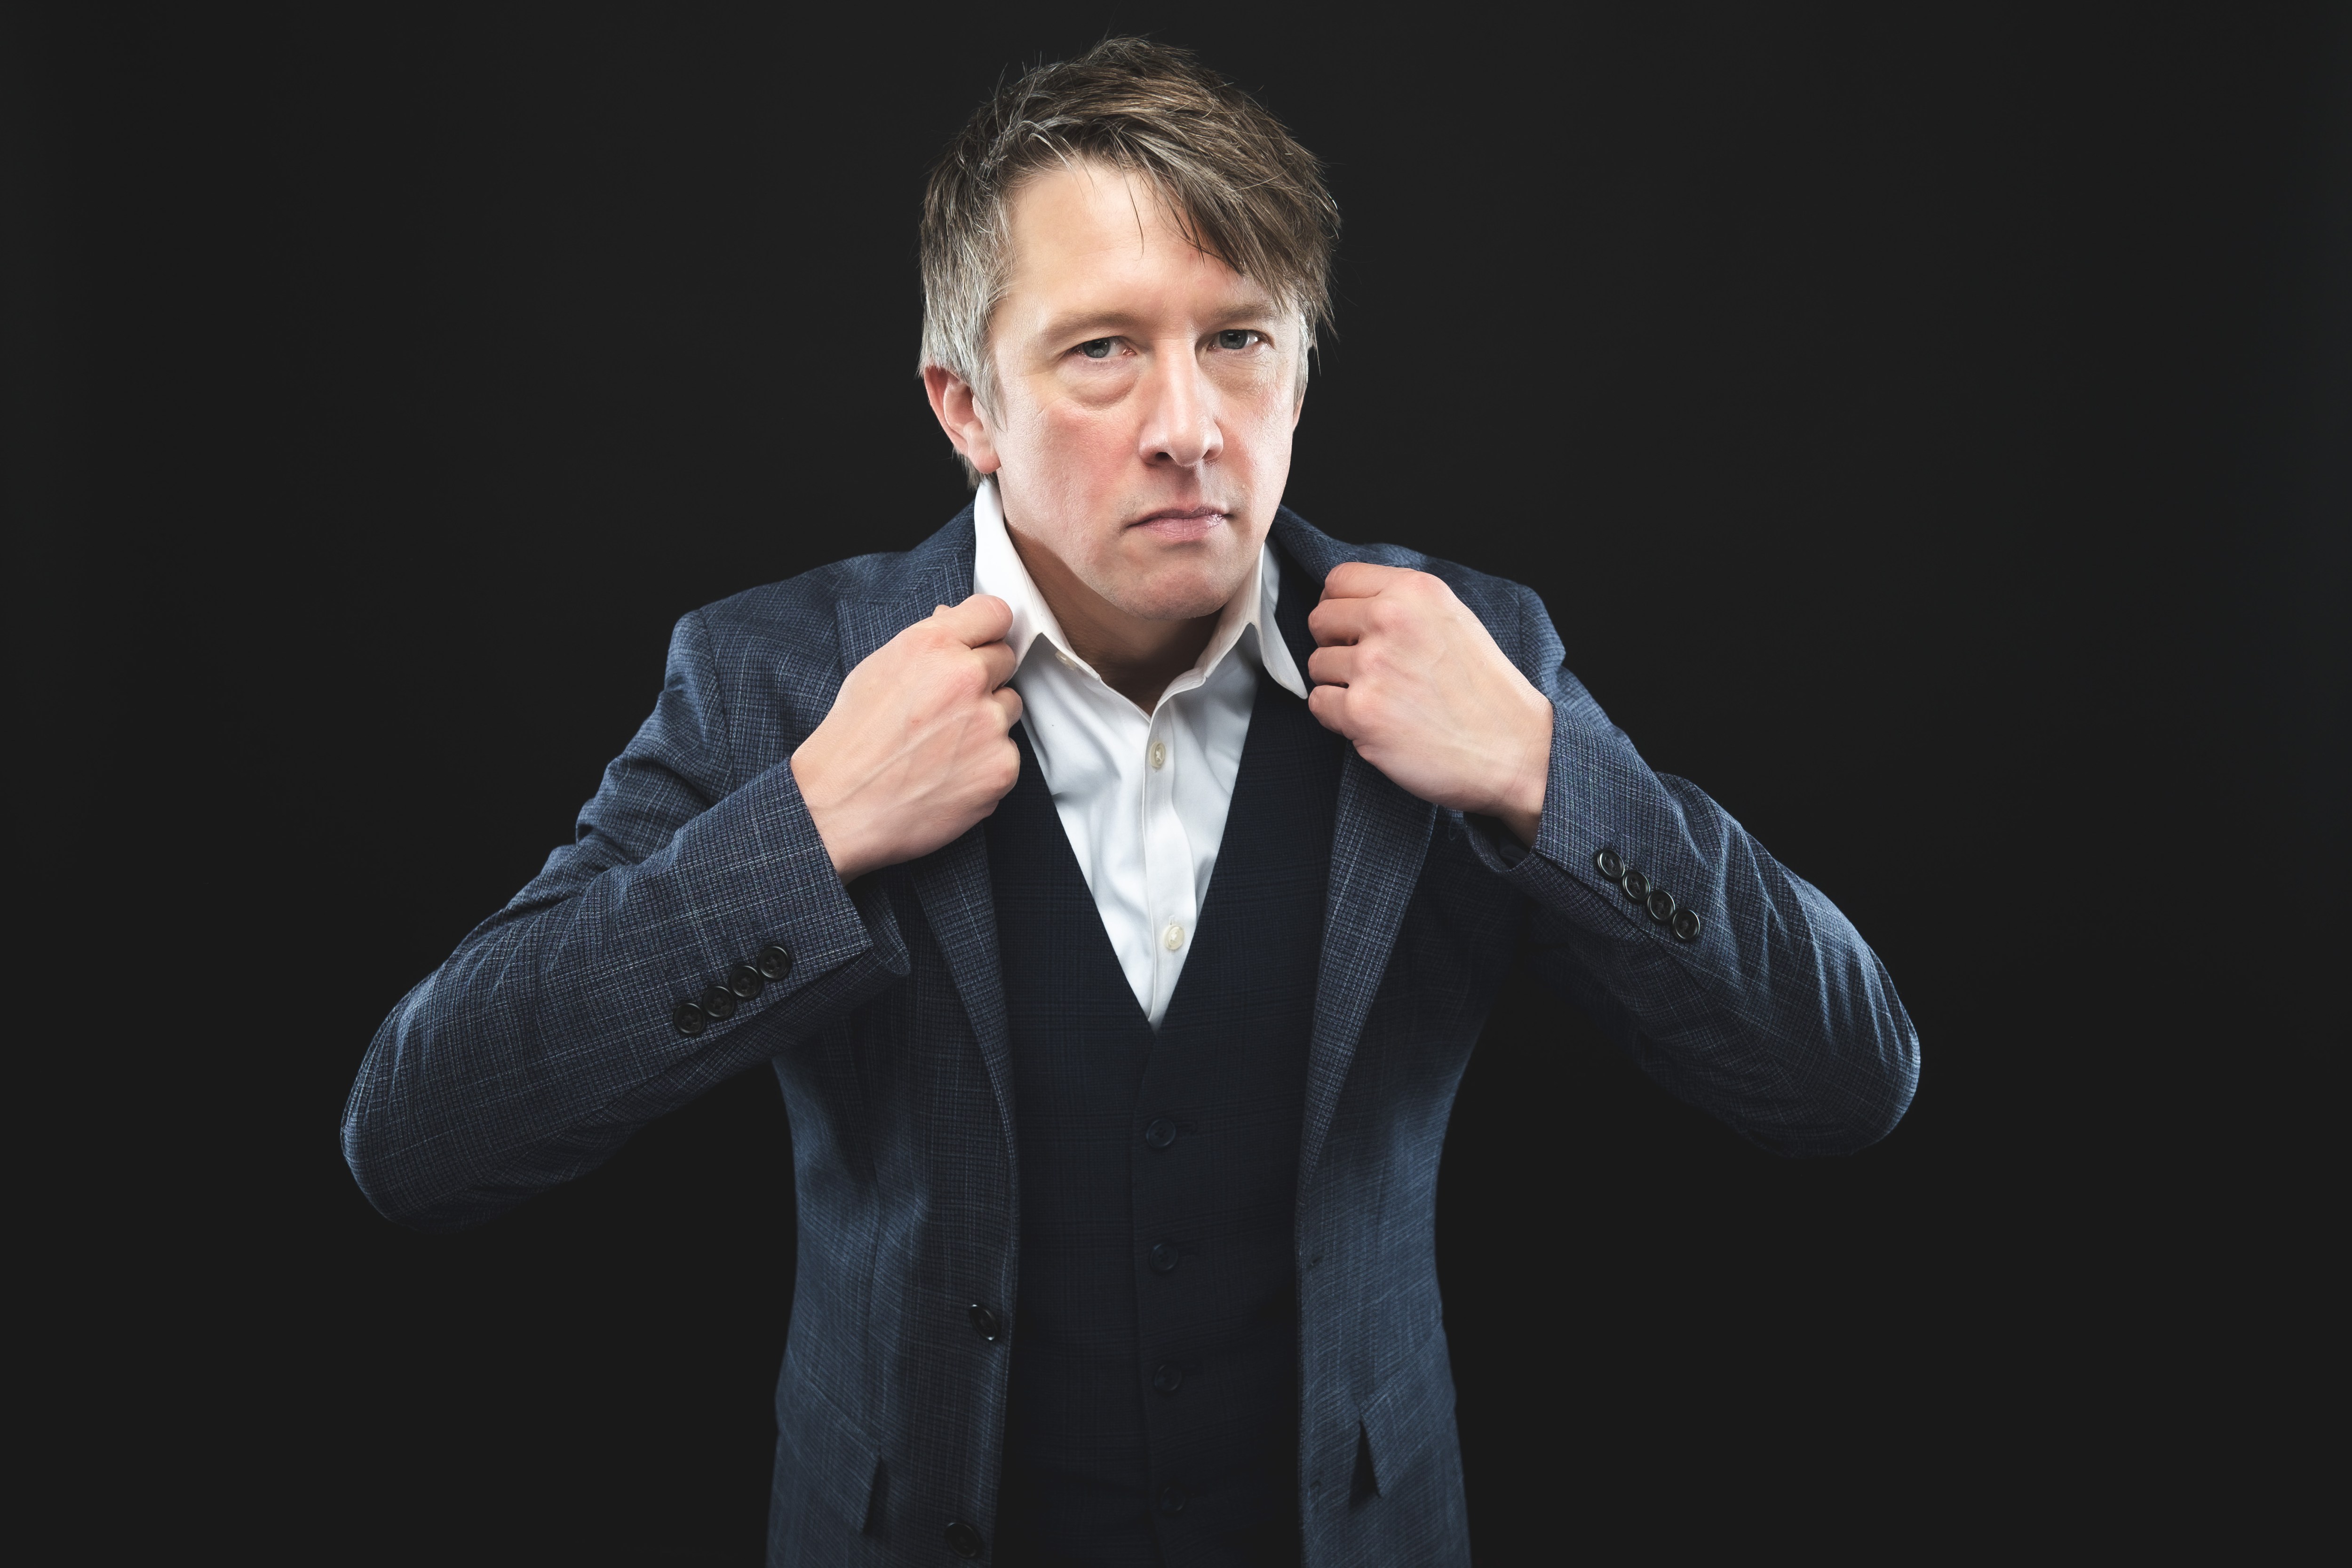 Jonathan Pie has glints of genius, but this show doesn’t stack up